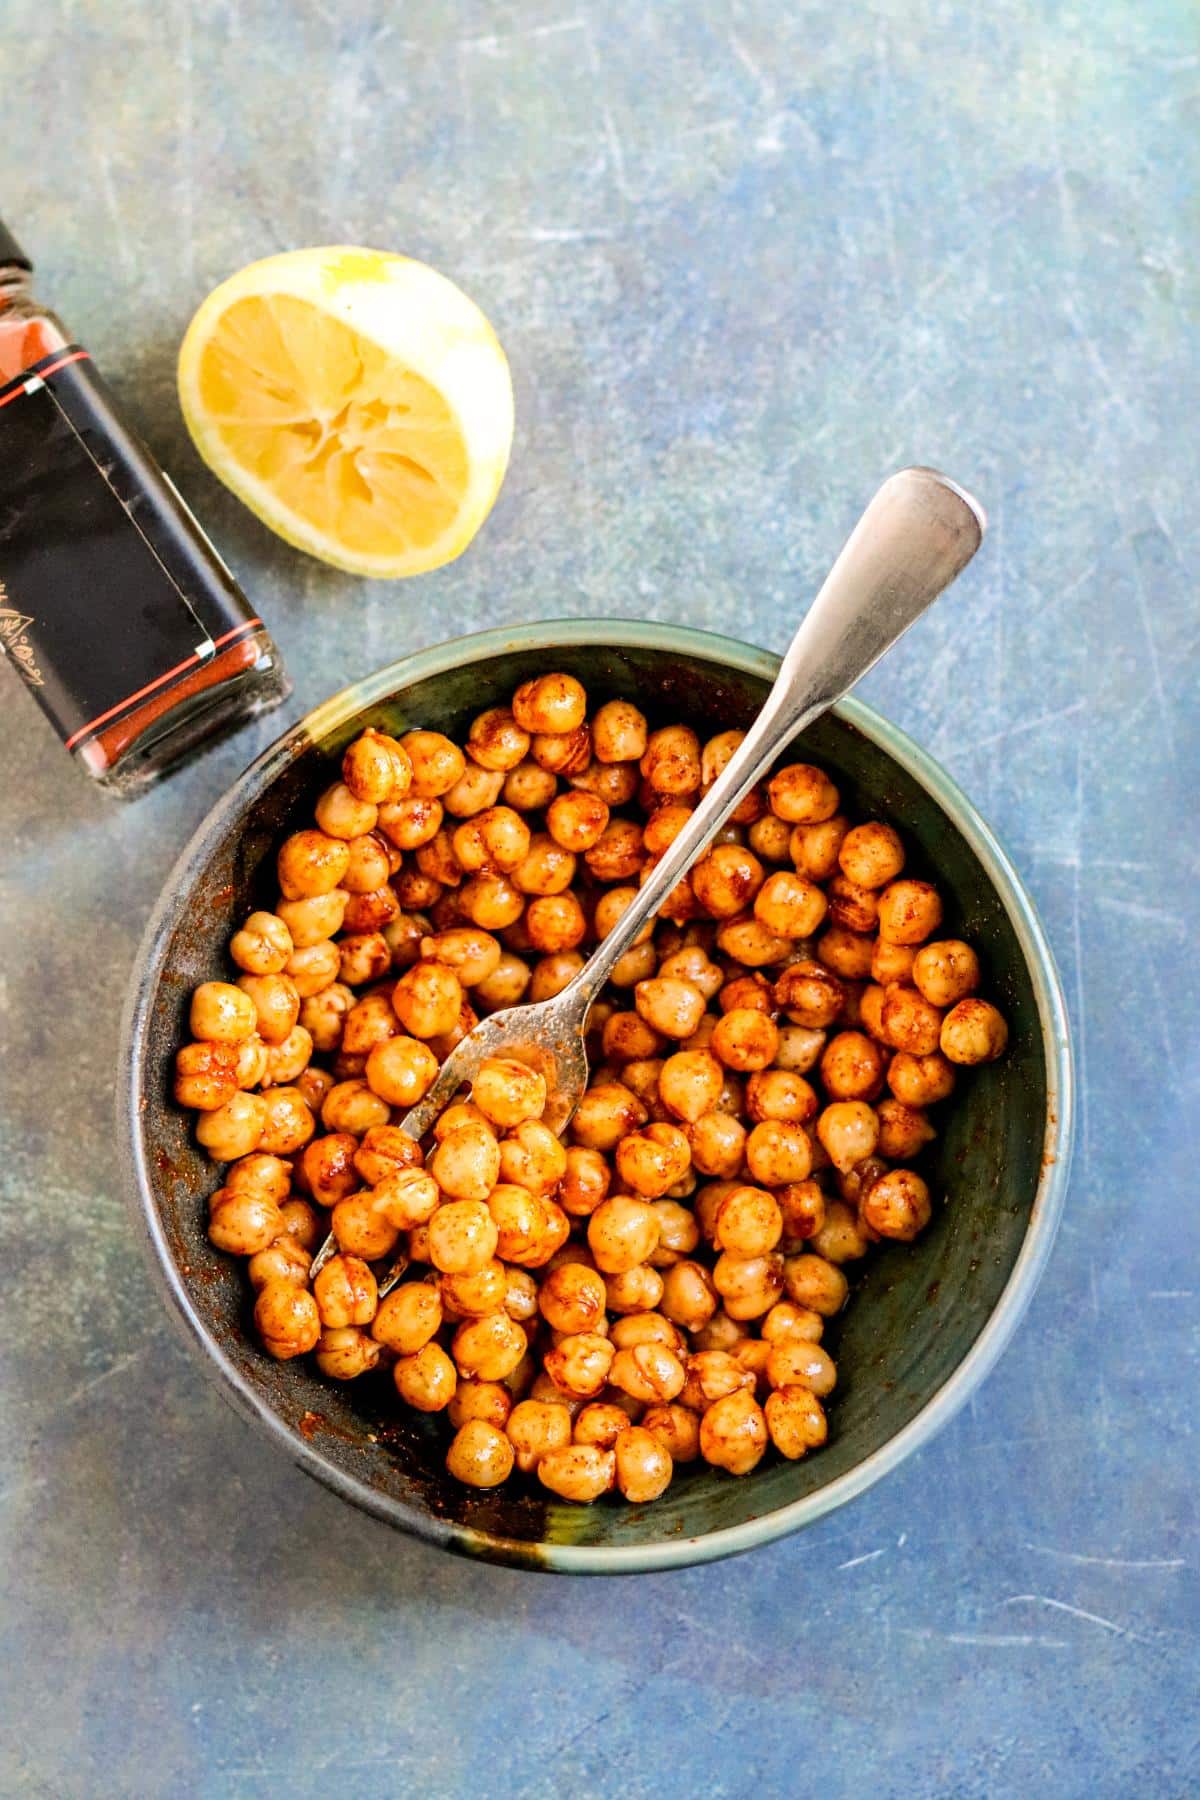 Bowl of chickpeas, bottle of smoked paprika, and half a zested and juiced lemon.